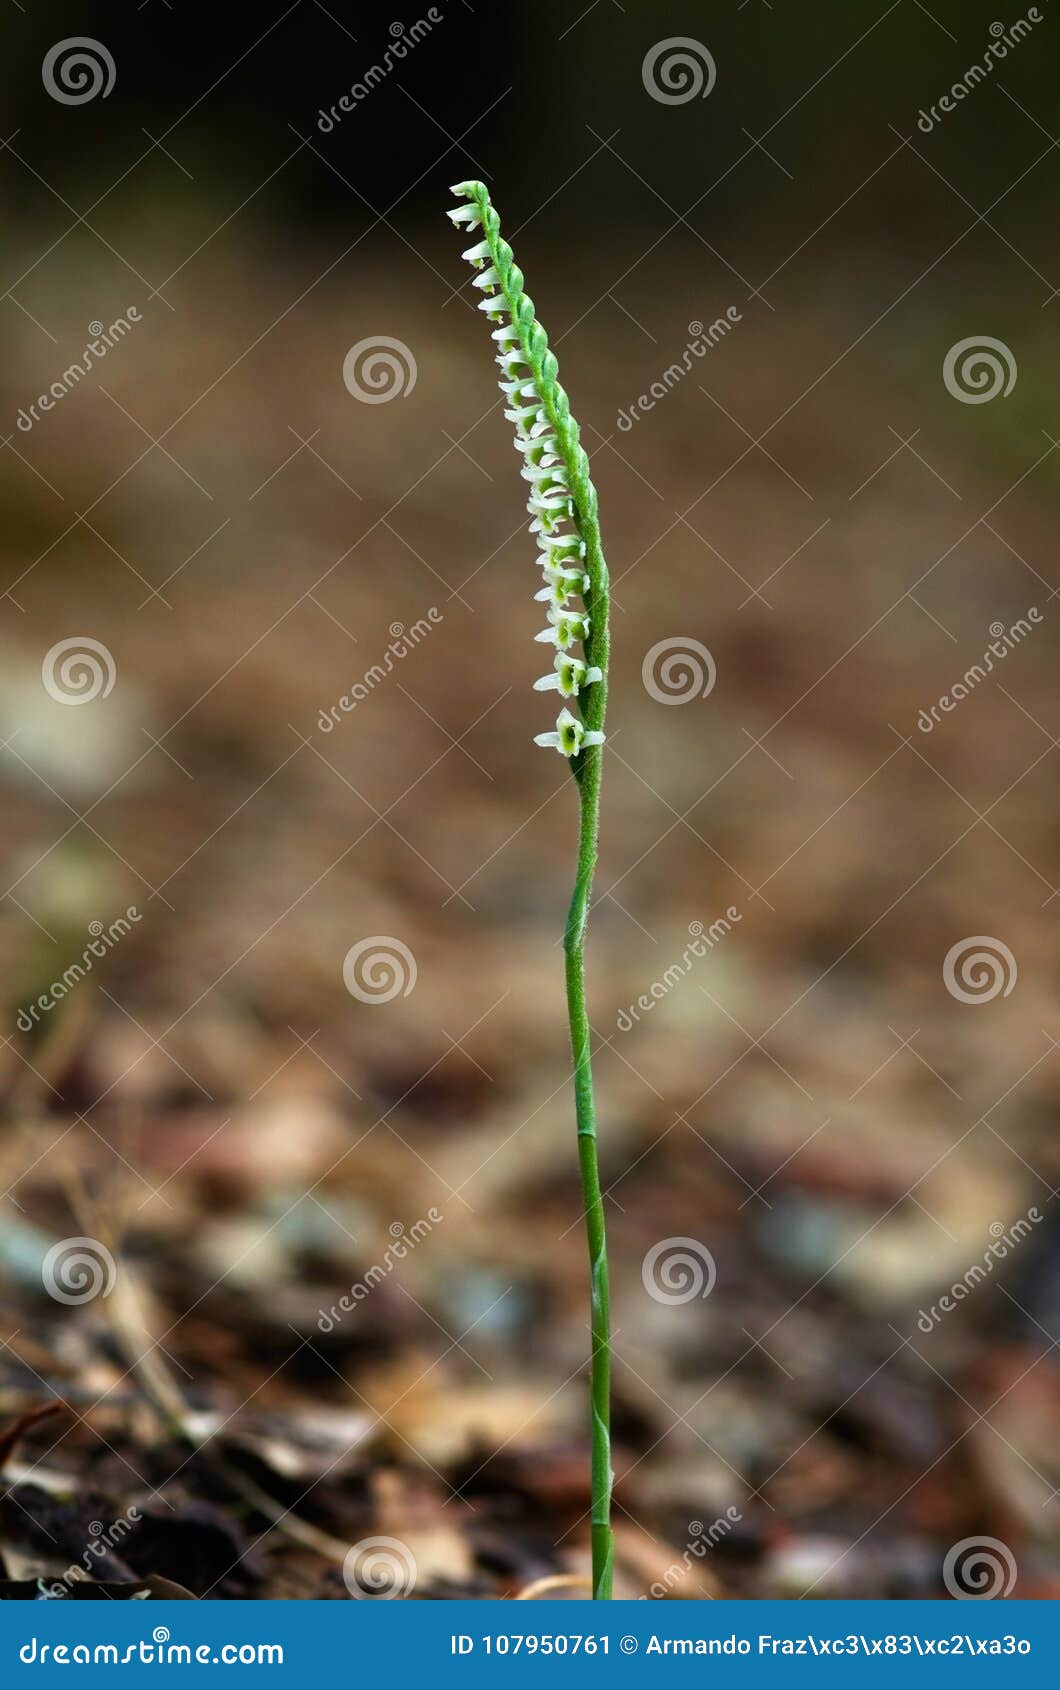 autumn lady`s tresses orchid, uncommon form - spiranthes spiralis